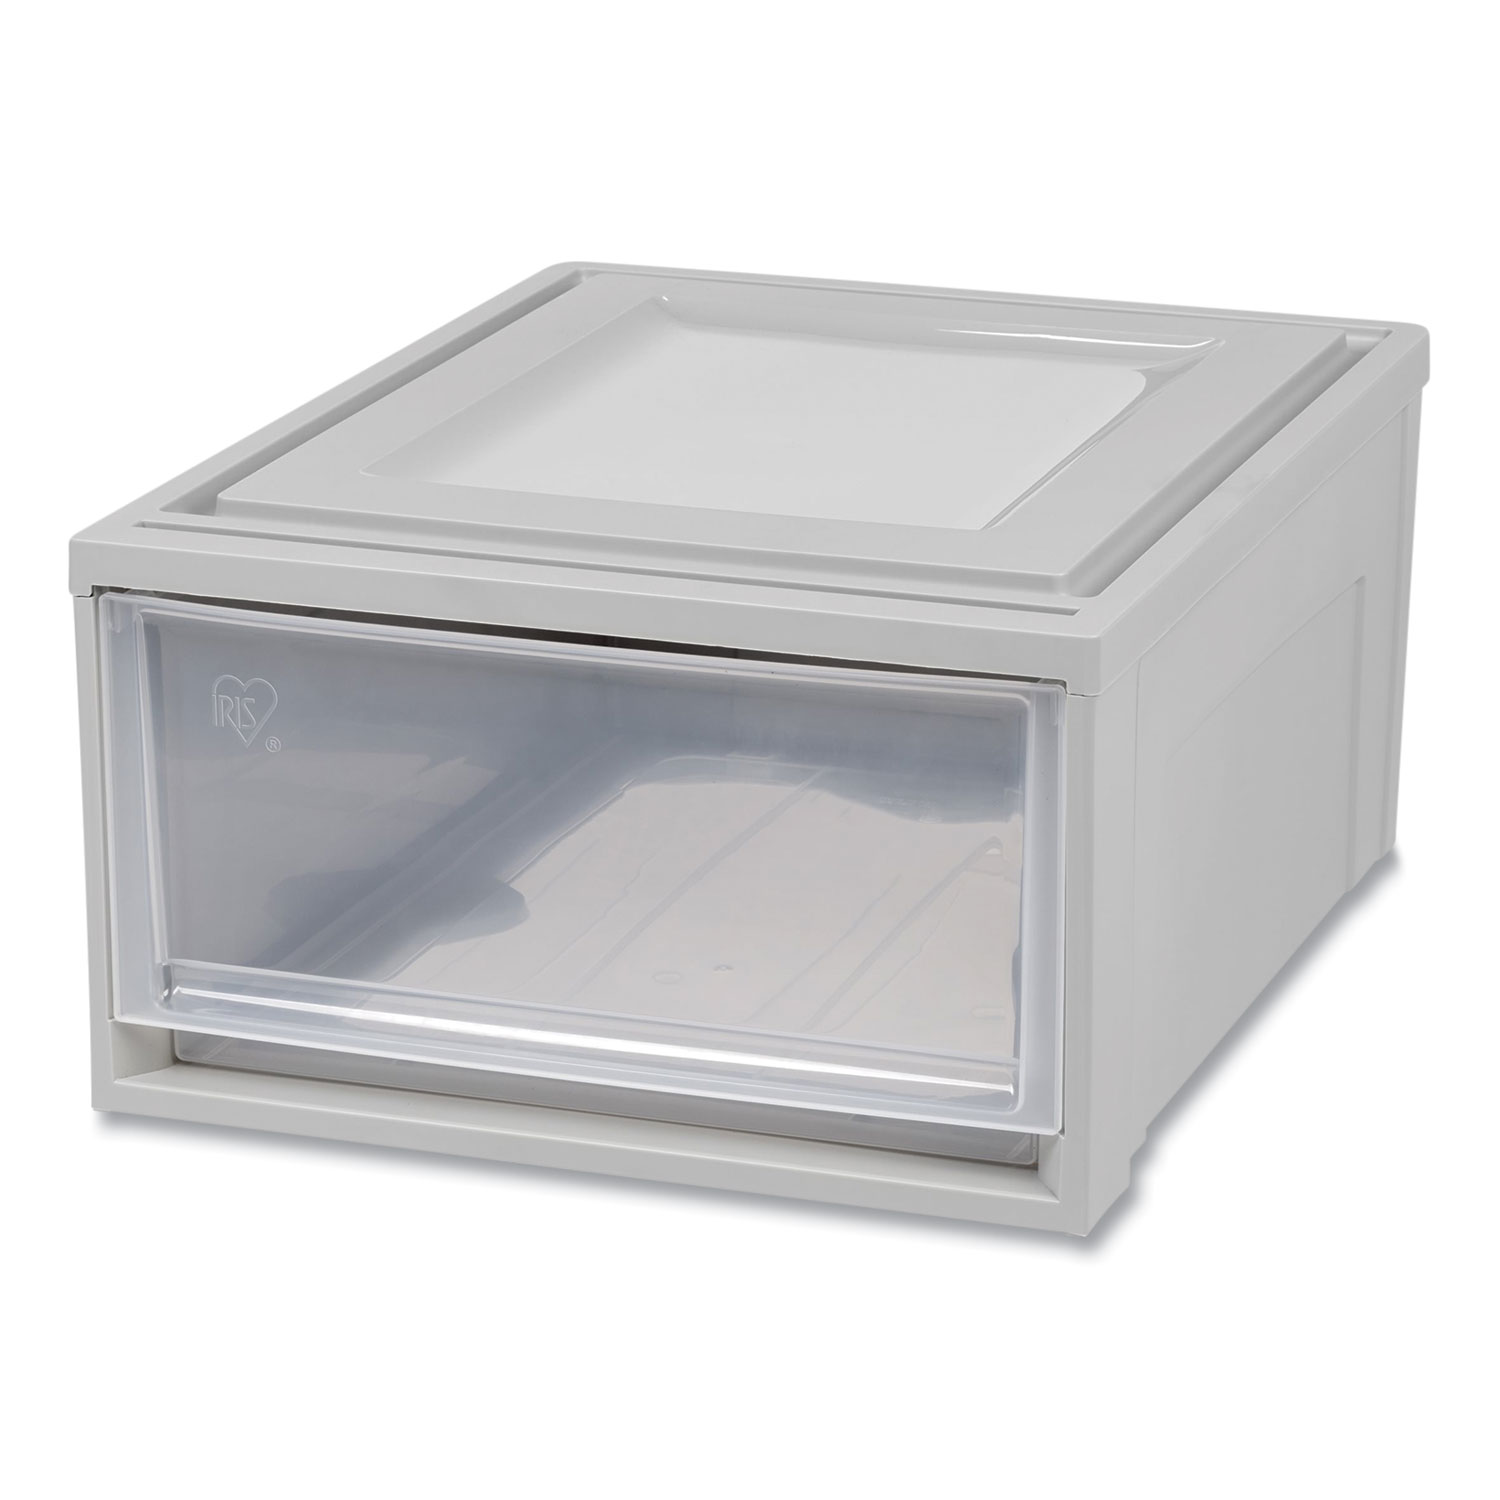 IRIS Stackable Storage Drawer, 7.75 gal, 15.75 x 19.62 x 9, Gray/Translucent Frost